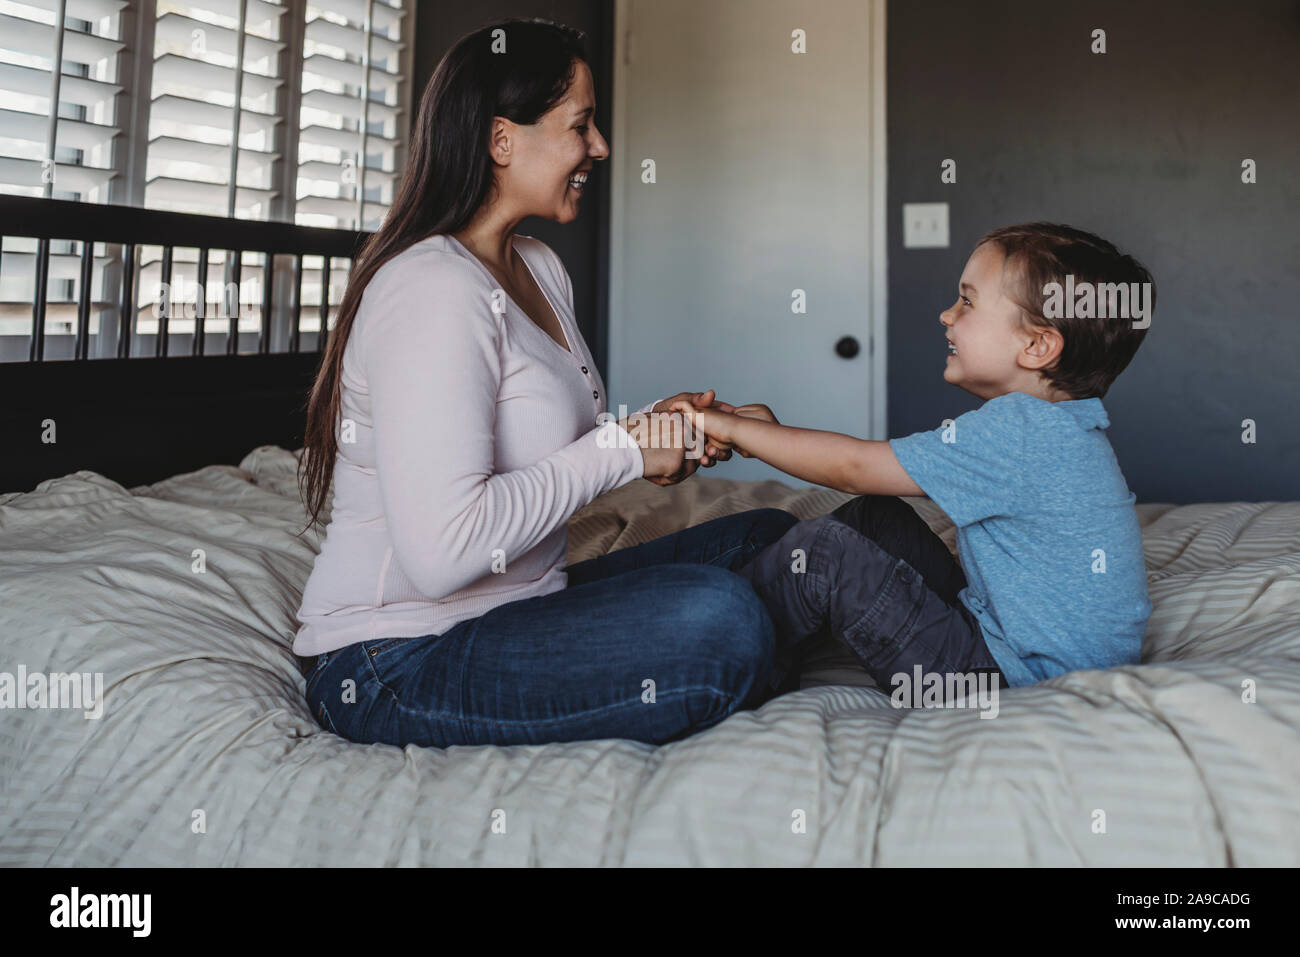 5 yr old boy and mid-30â€™s mom with long dark hair laughing on bed Stock Photo